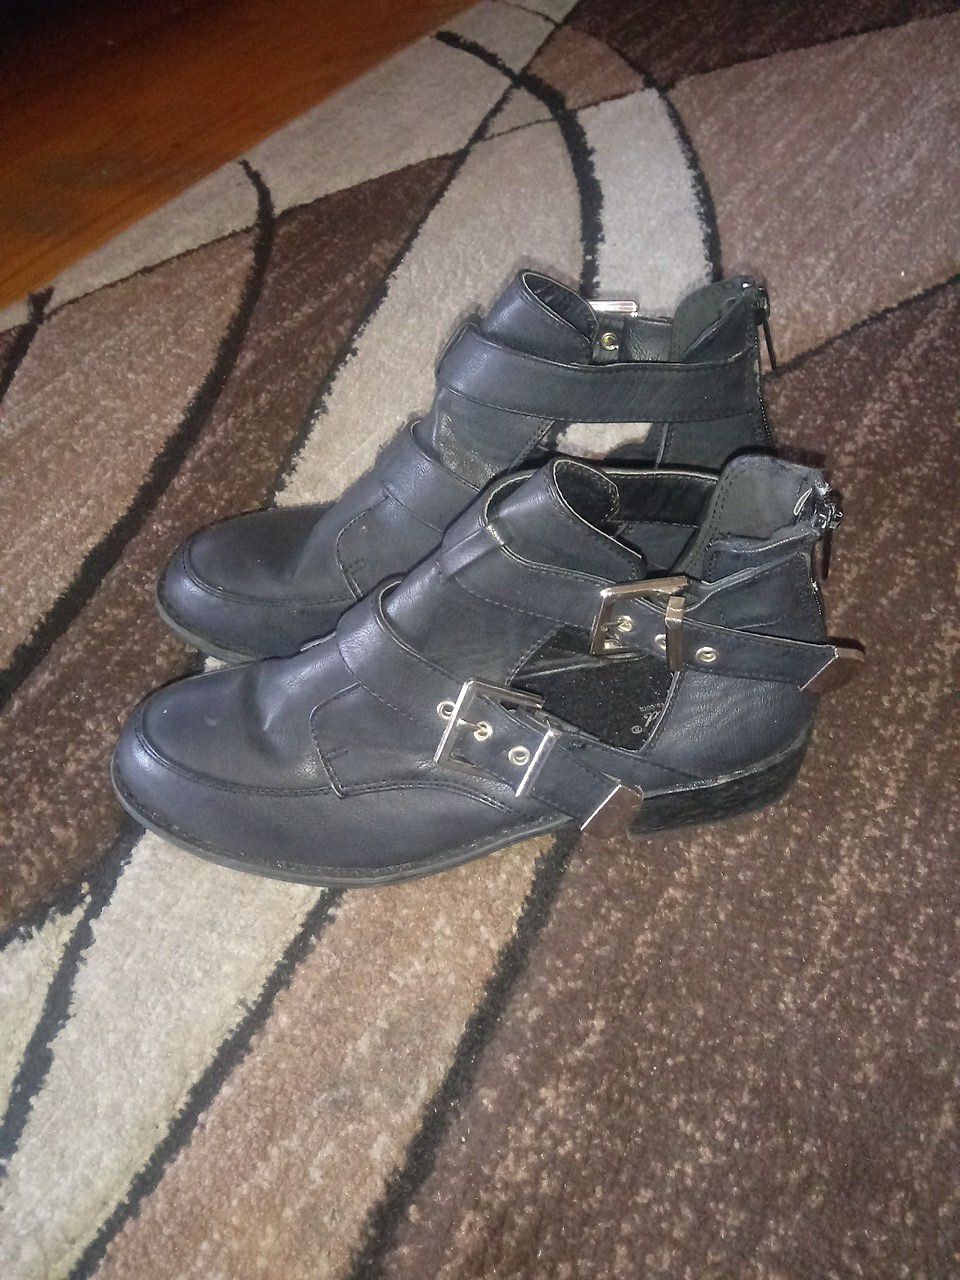 Women size 8.5 boots by wanted $20